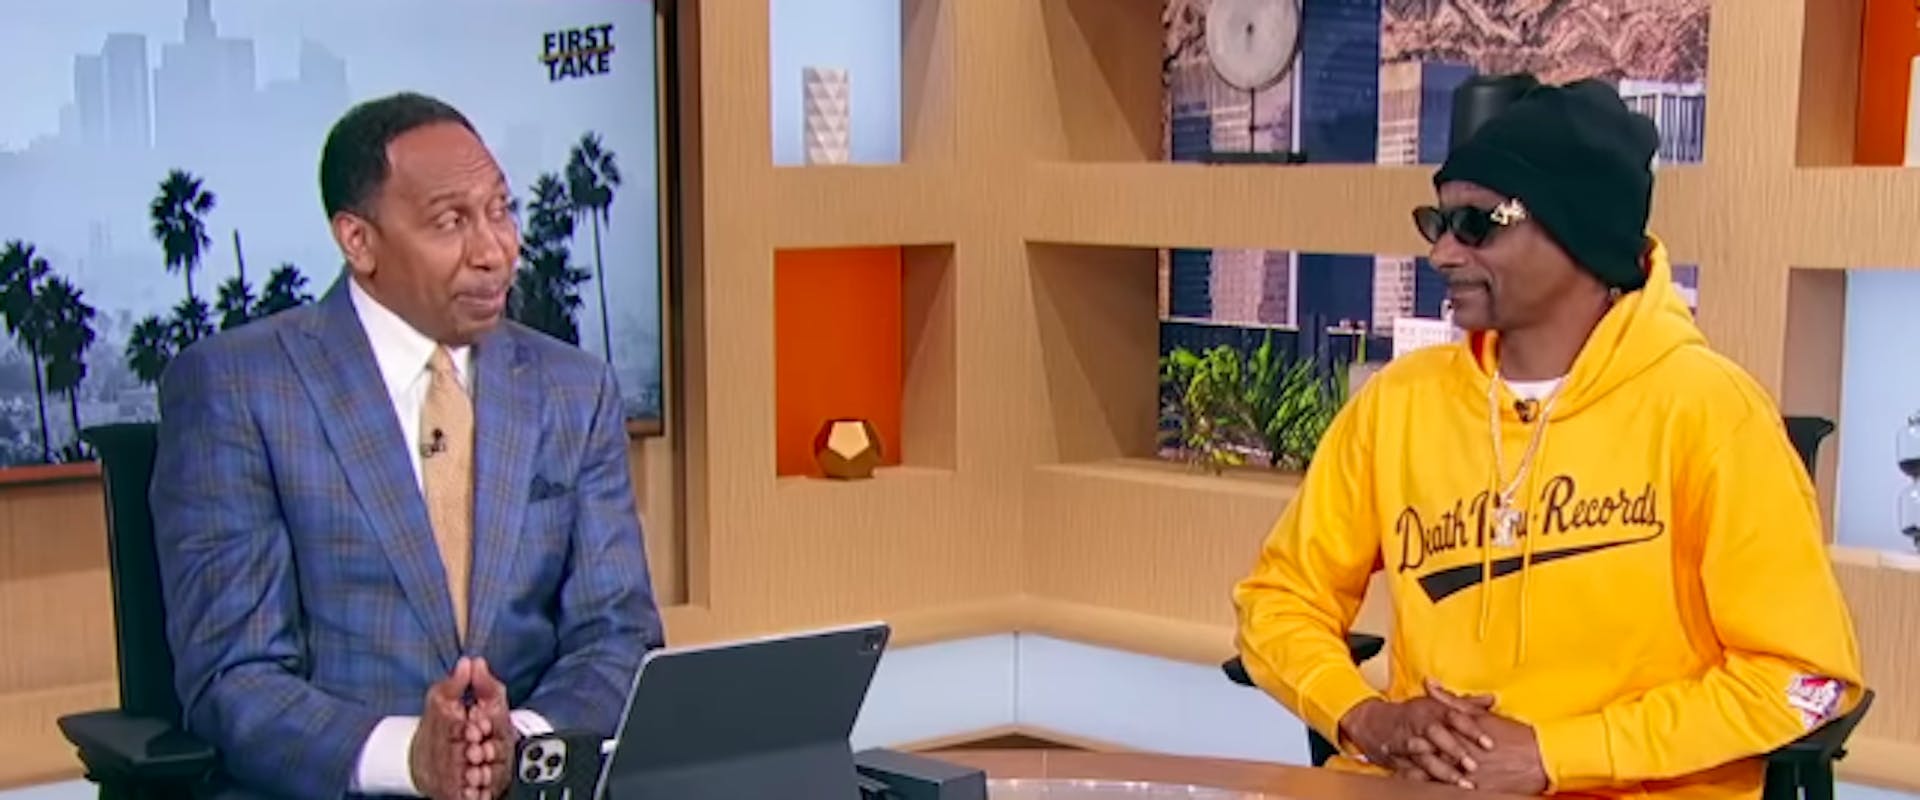 Snoop Dogg, Stephen A. Smith First Take